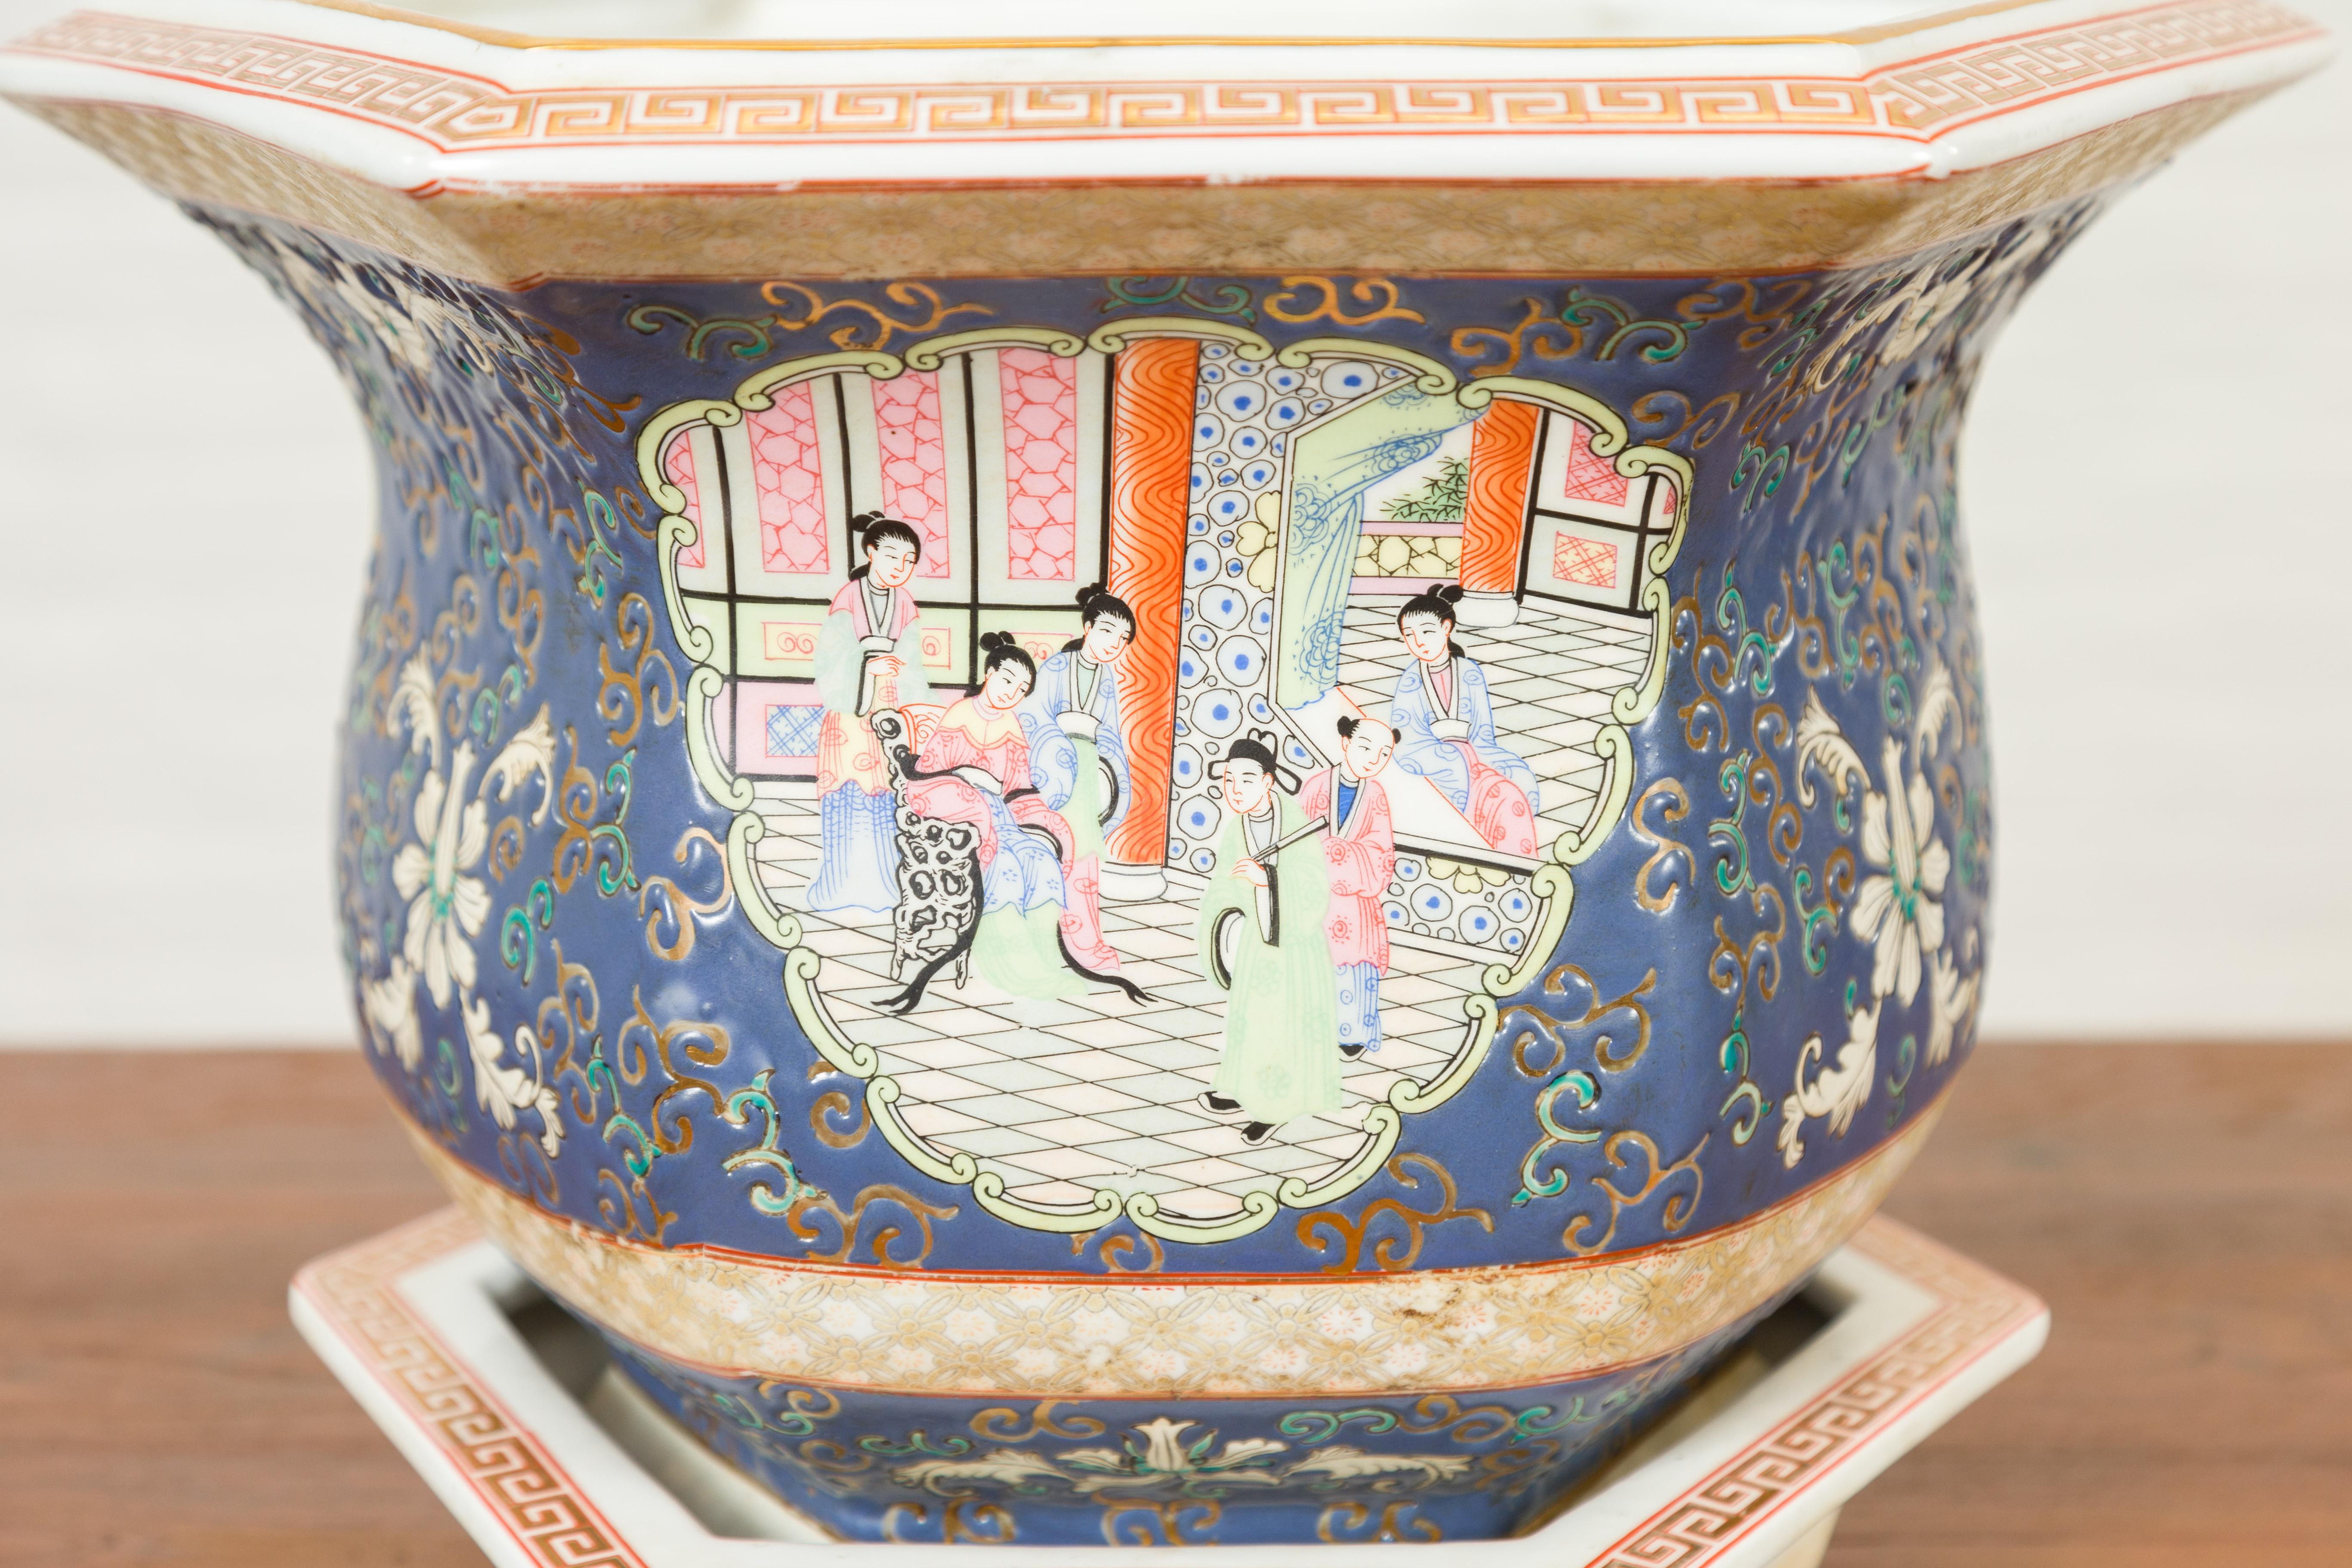 Contemporary Chinese Hexagonal Planter with Hand Painted Courtyard Scenes Depicting Maidens